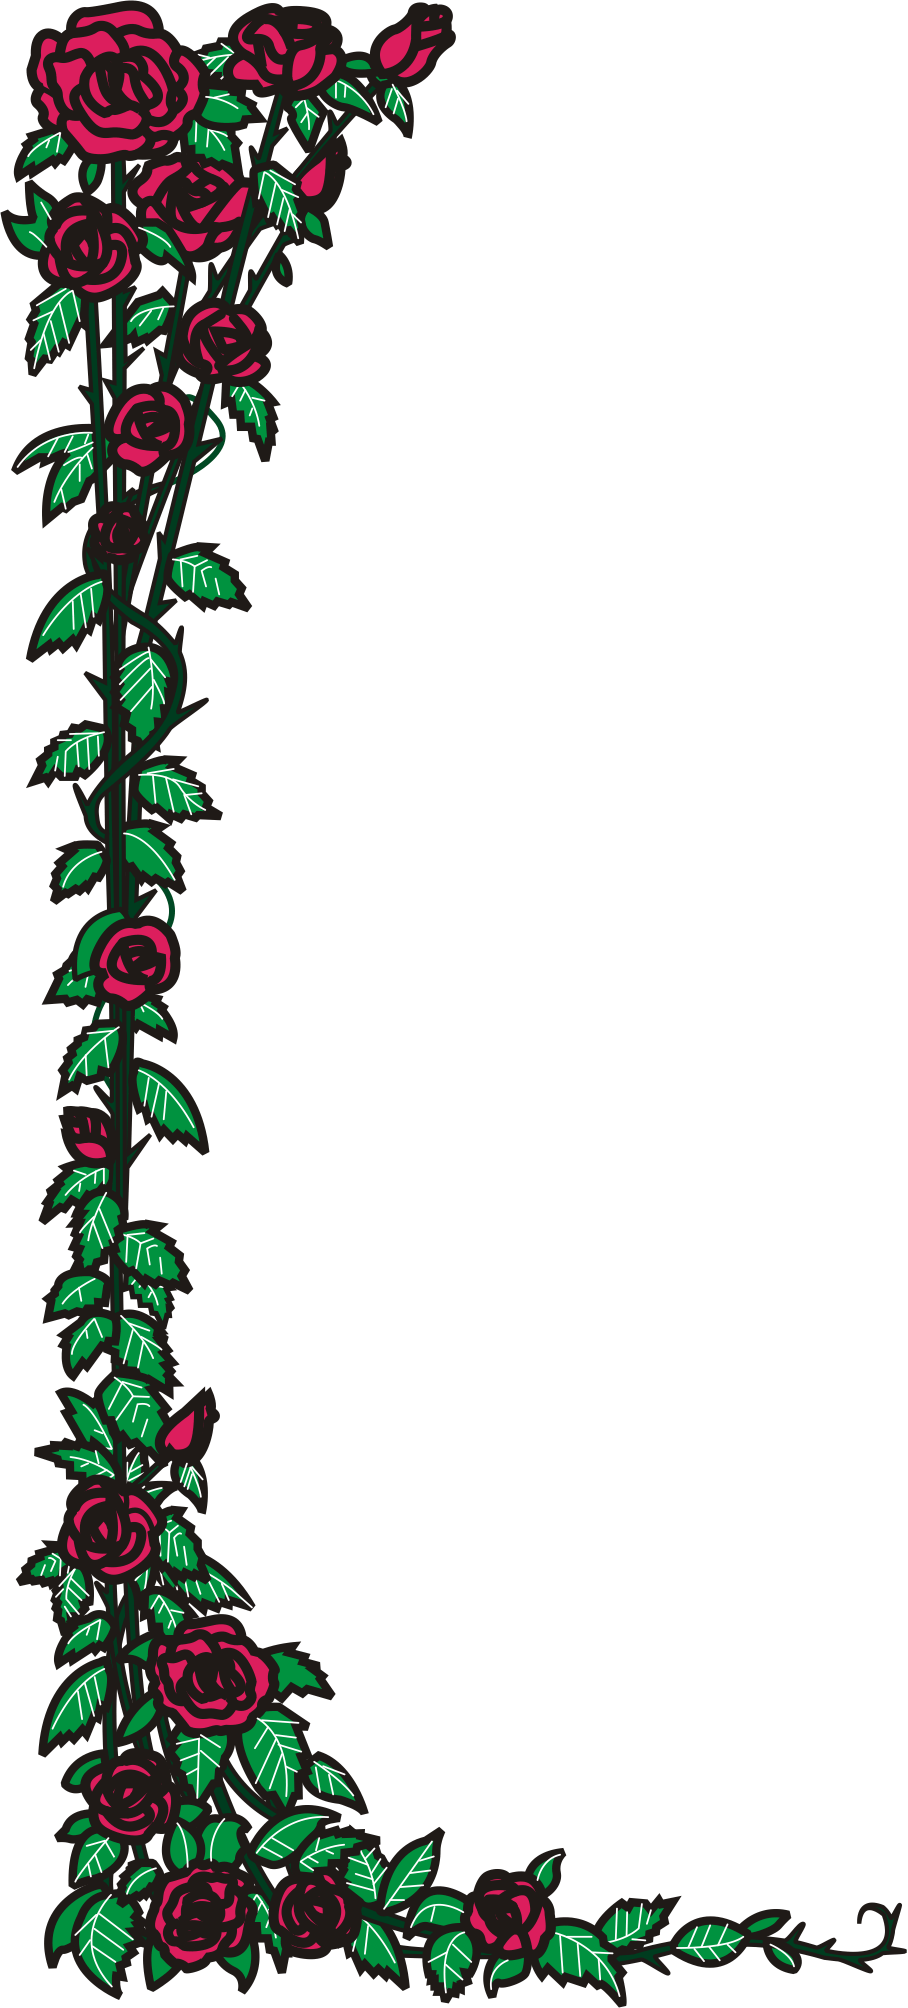 Free Vining Roses Background Clipart.